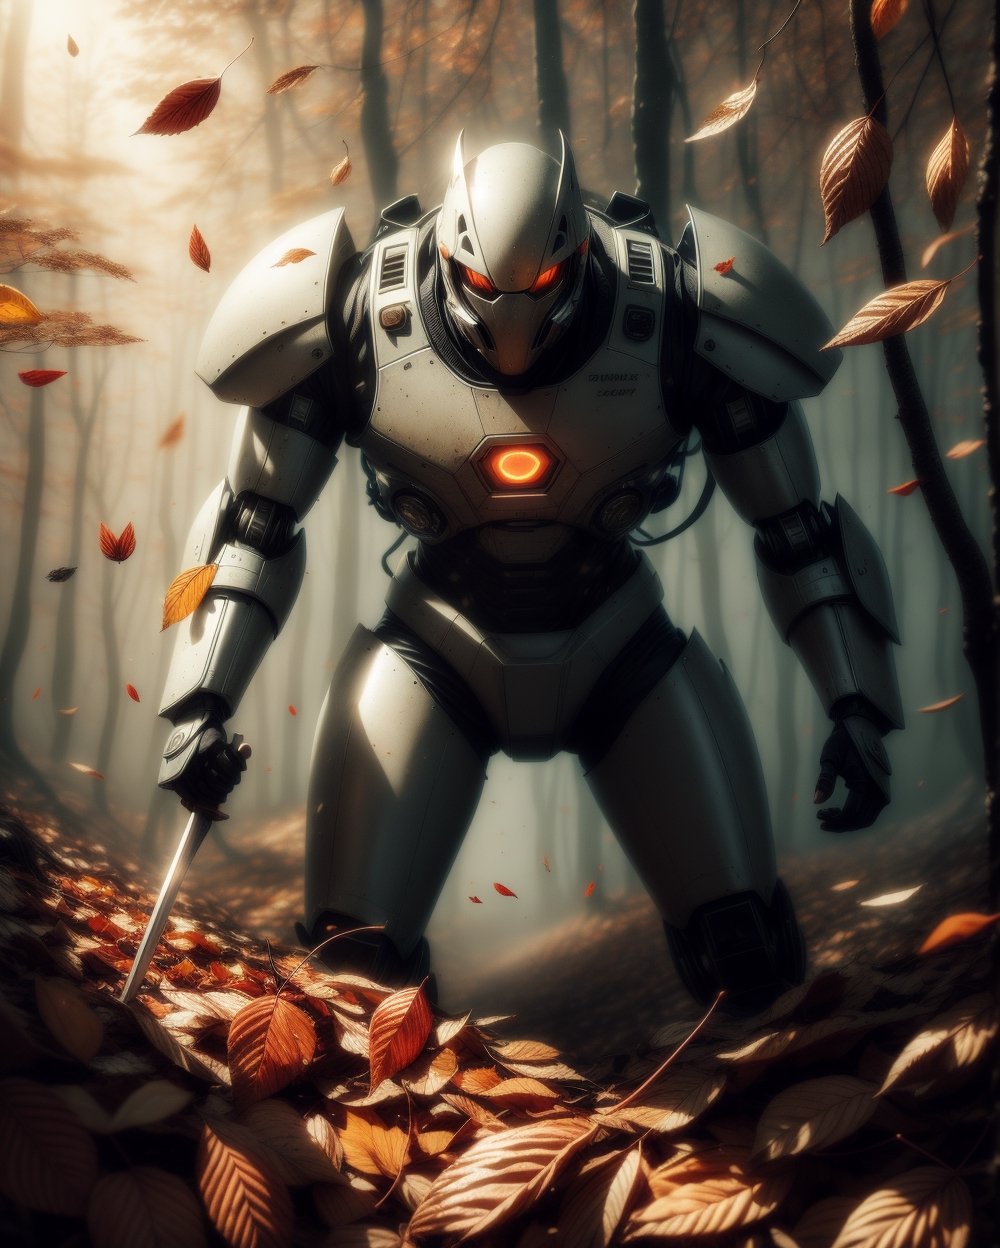 vintage style picture, half_body, 1man, dinamic_pose, intricate futuristic mecha armour suit, white and black, face mask, neon, holding a sword, standing in the forest, vegies, (((autumn leaf drop to the ground, flying autumn leaf))), seround by mist, gritty, dusty, photohyperrealistic, highly detailed, hyper realistic, with dramatic polarizing filter, sharp focus, HDR, UHD, 64K, 16mm, color graded portra 400 film, remarkable color, ultra realistic,,ABMautumnleaf,Extremely Realistic